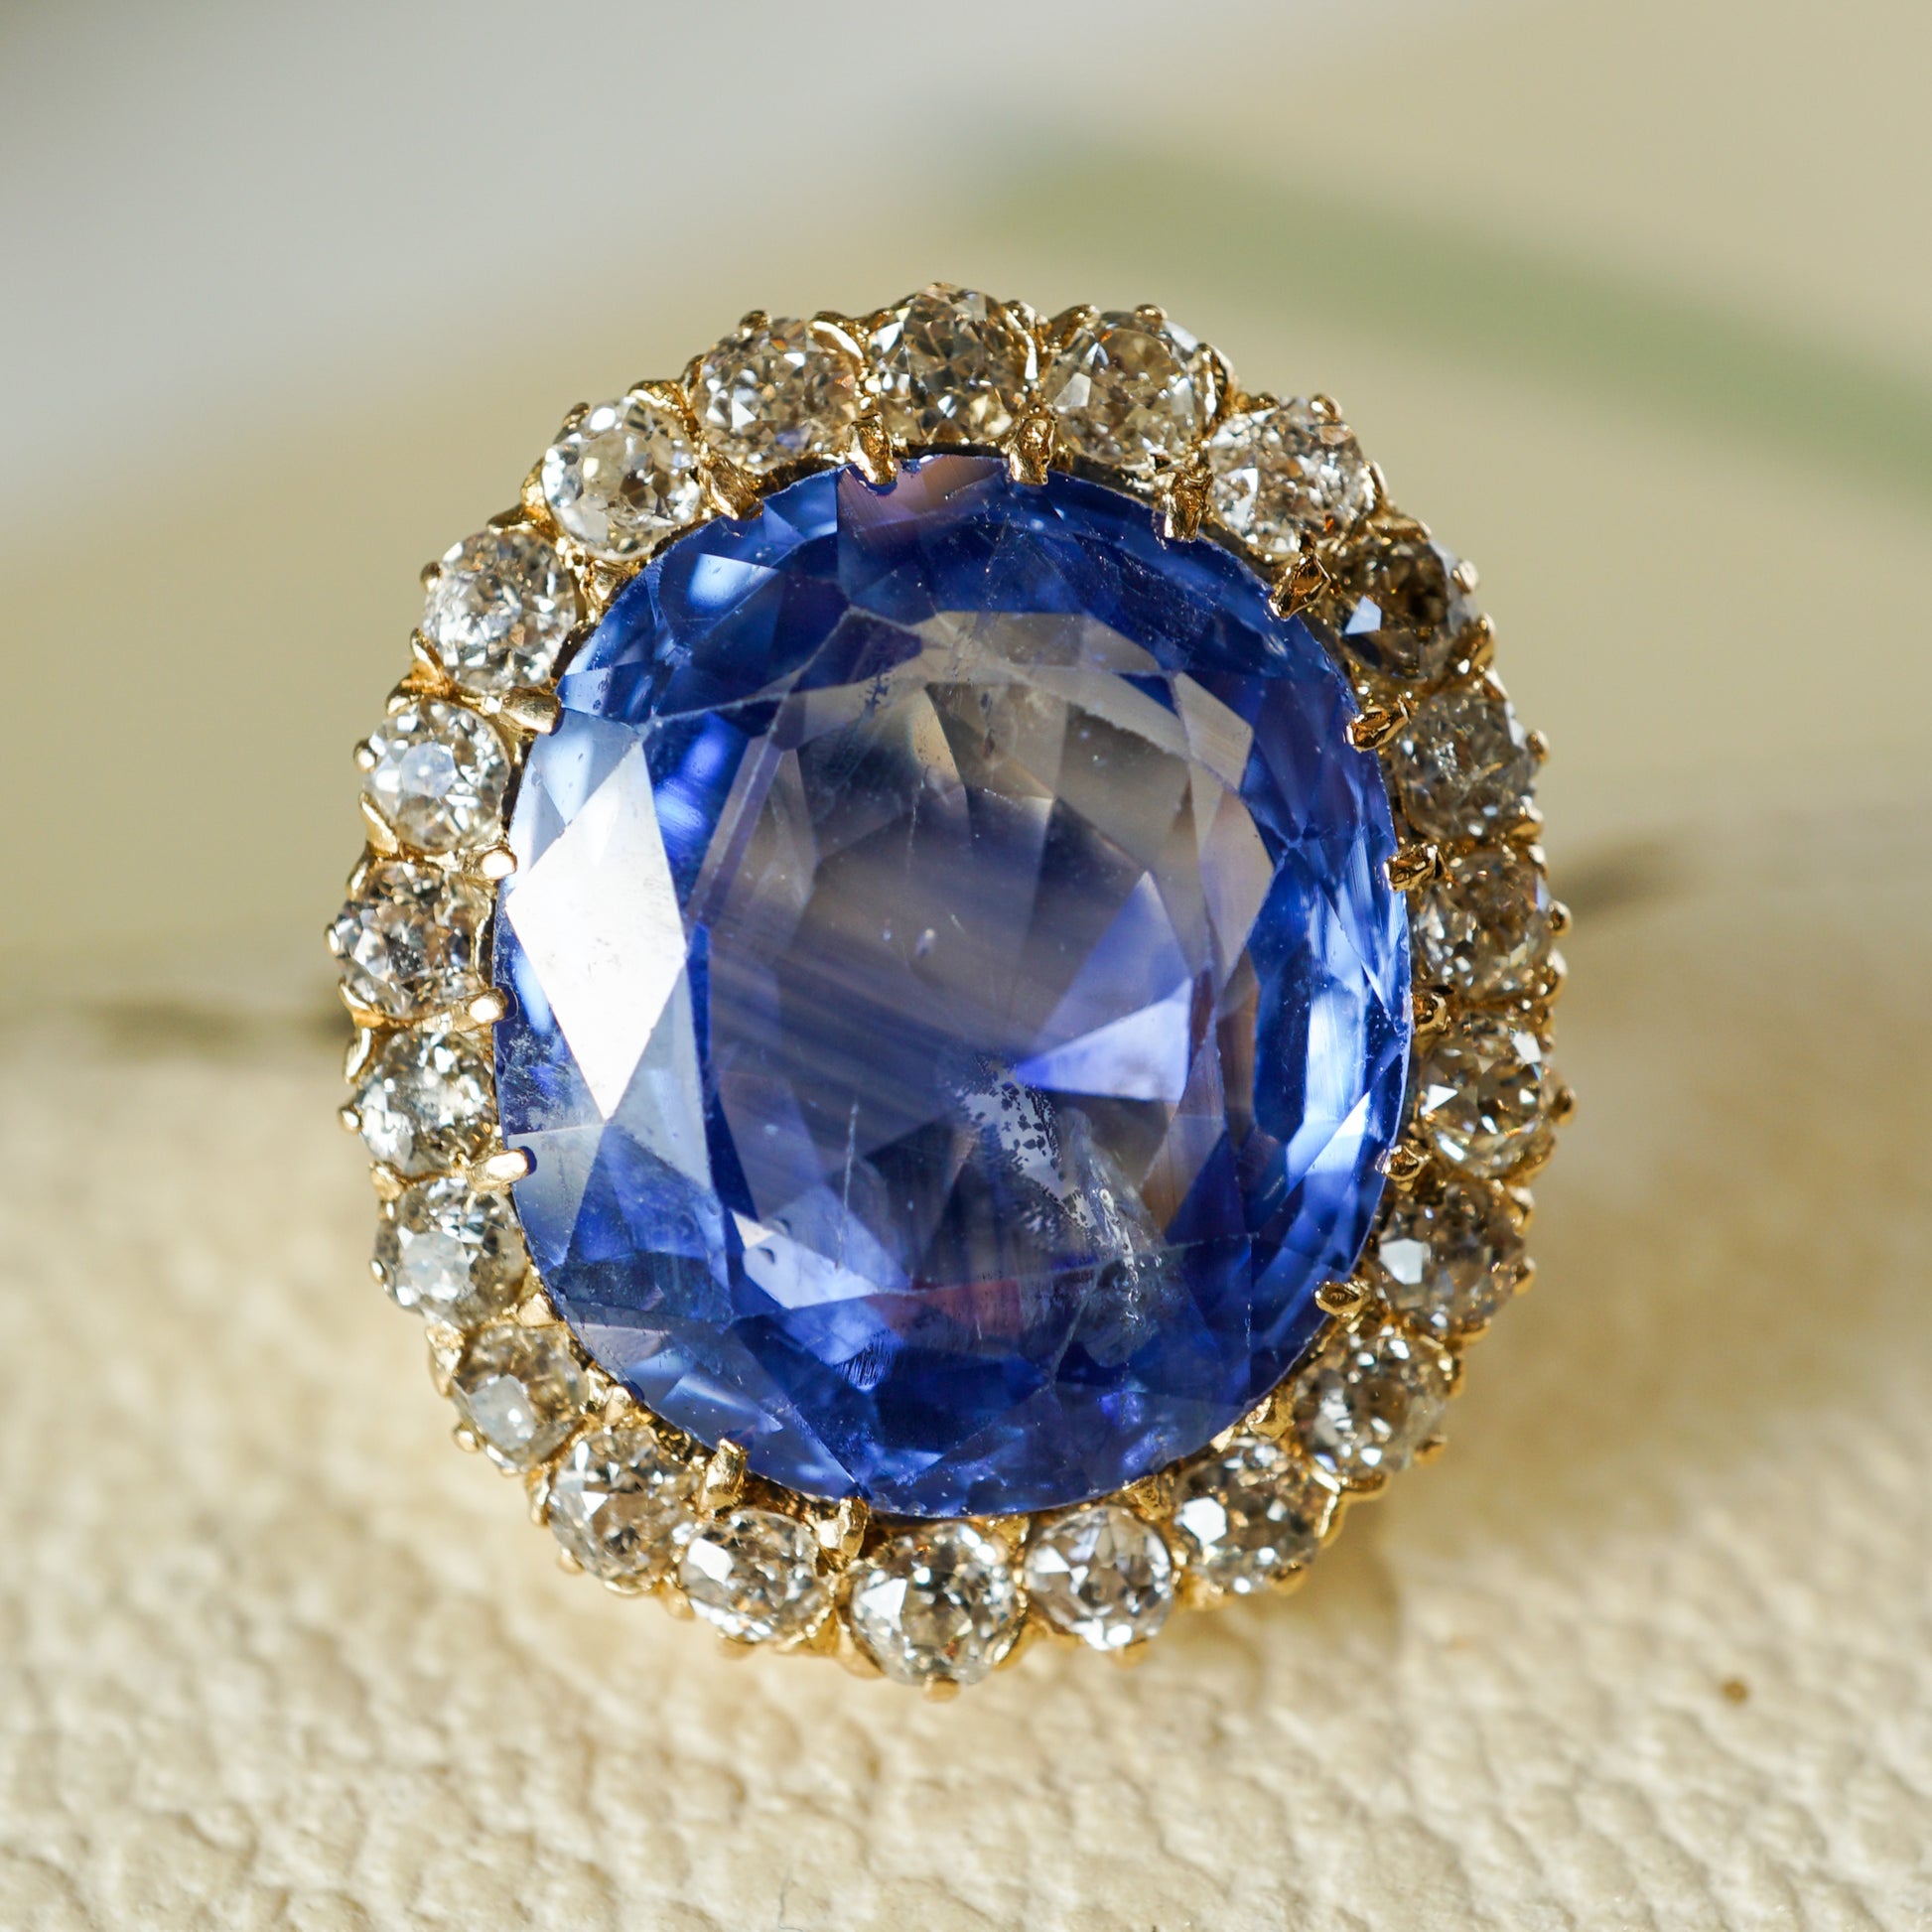 9.62 Victorian Blue Spinel & Diamond Cocktail Ring in 14kComposition: PlatinumRing Size: 6.5Total Diamond Weight: 1.54 ctTotal Gram Weight: 7.4 g